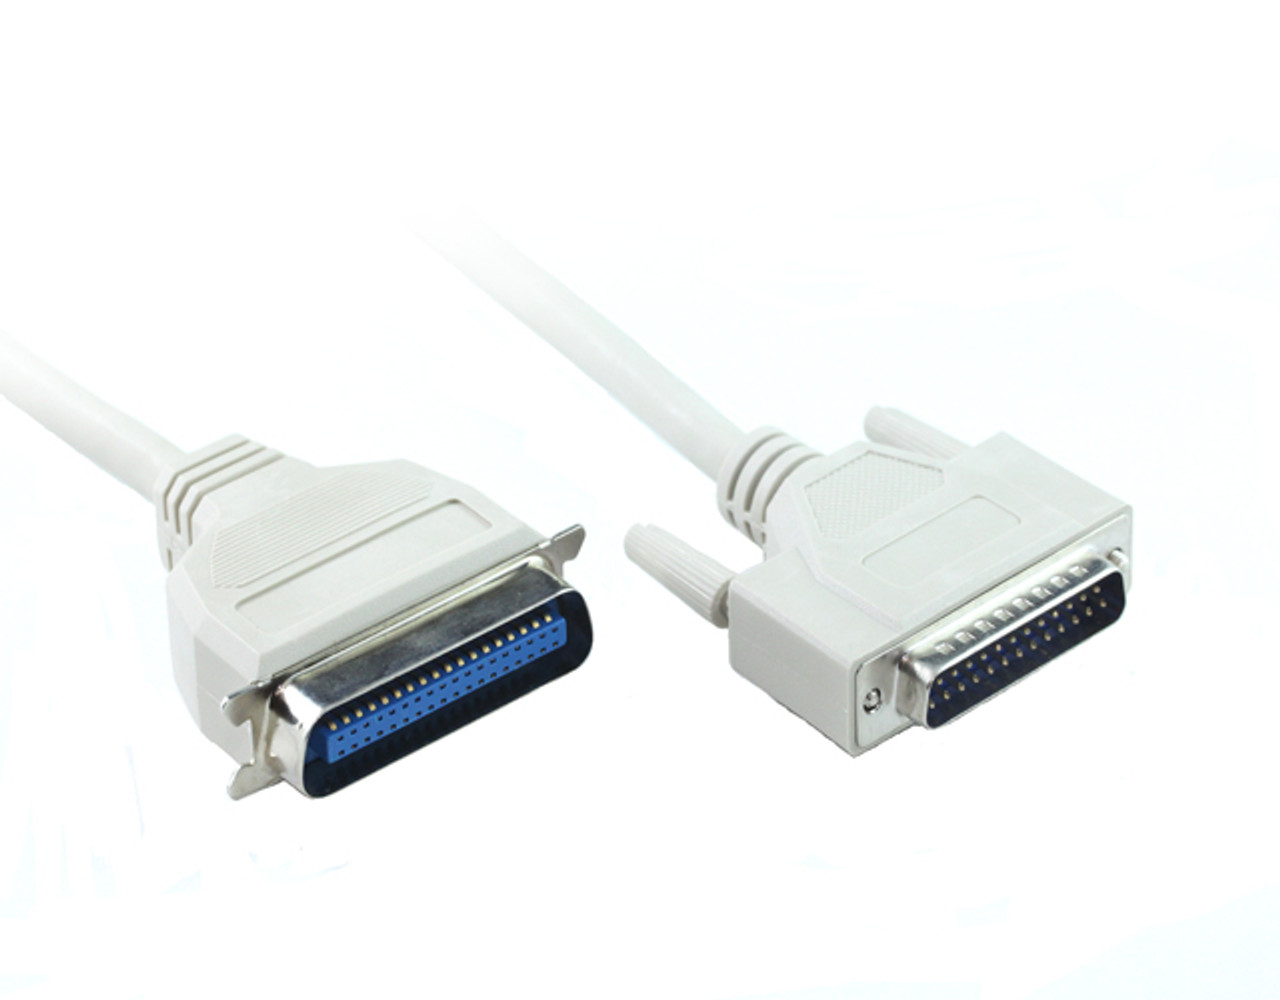 1.8M IEEE 1284 Printer Cable